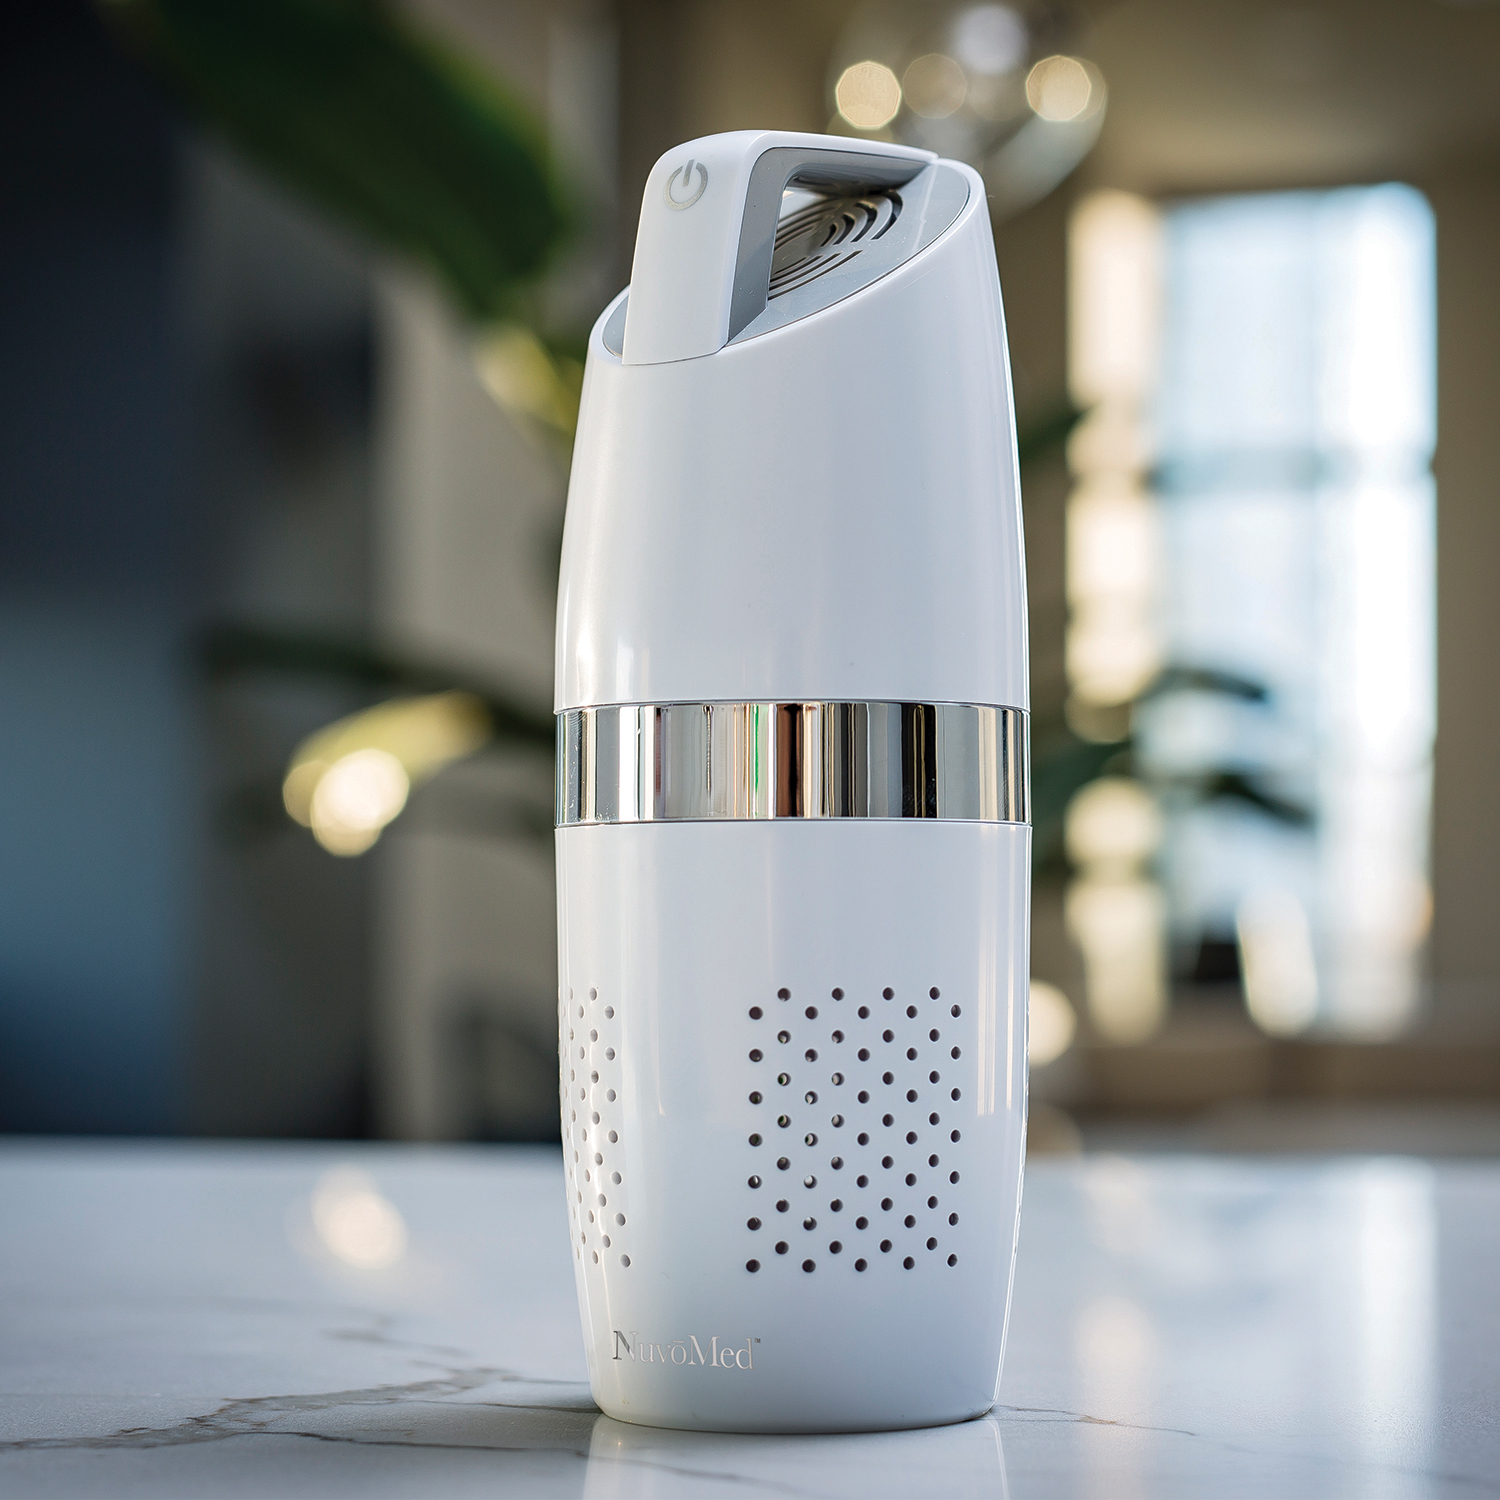 Portable Air Purifier – NuvoMed